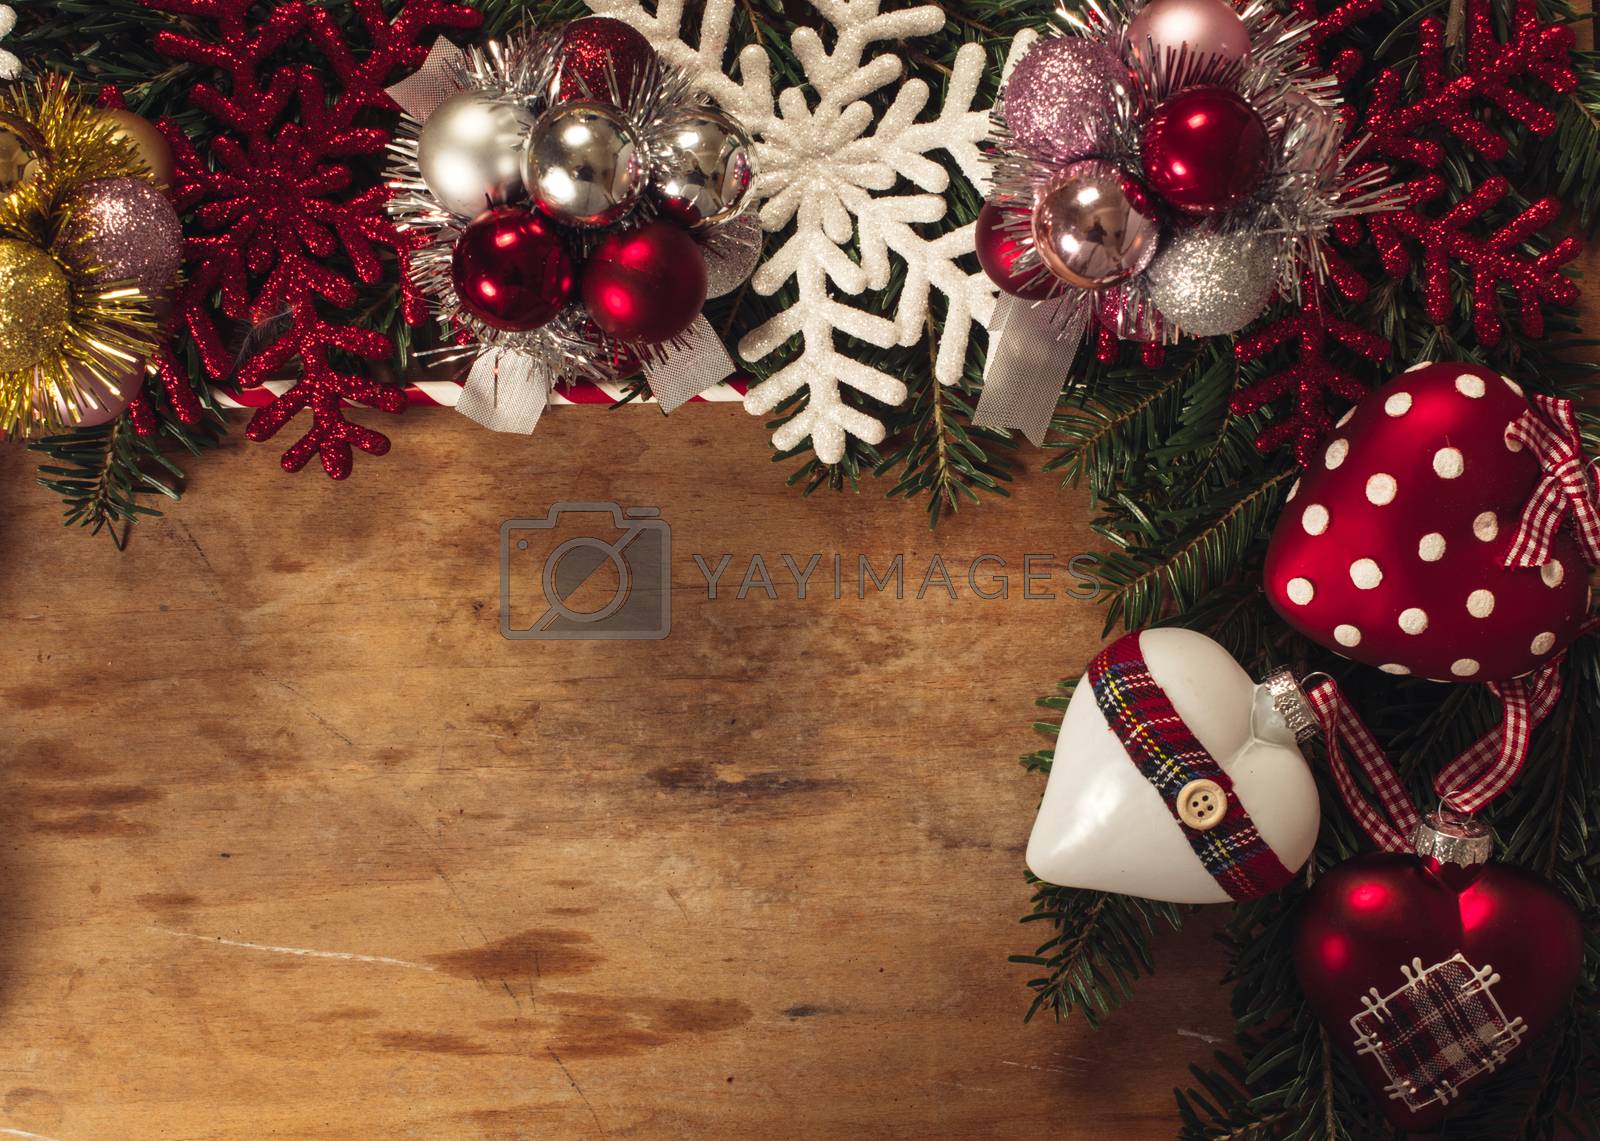 Royalty free image of Christmas concept by badmanproduction